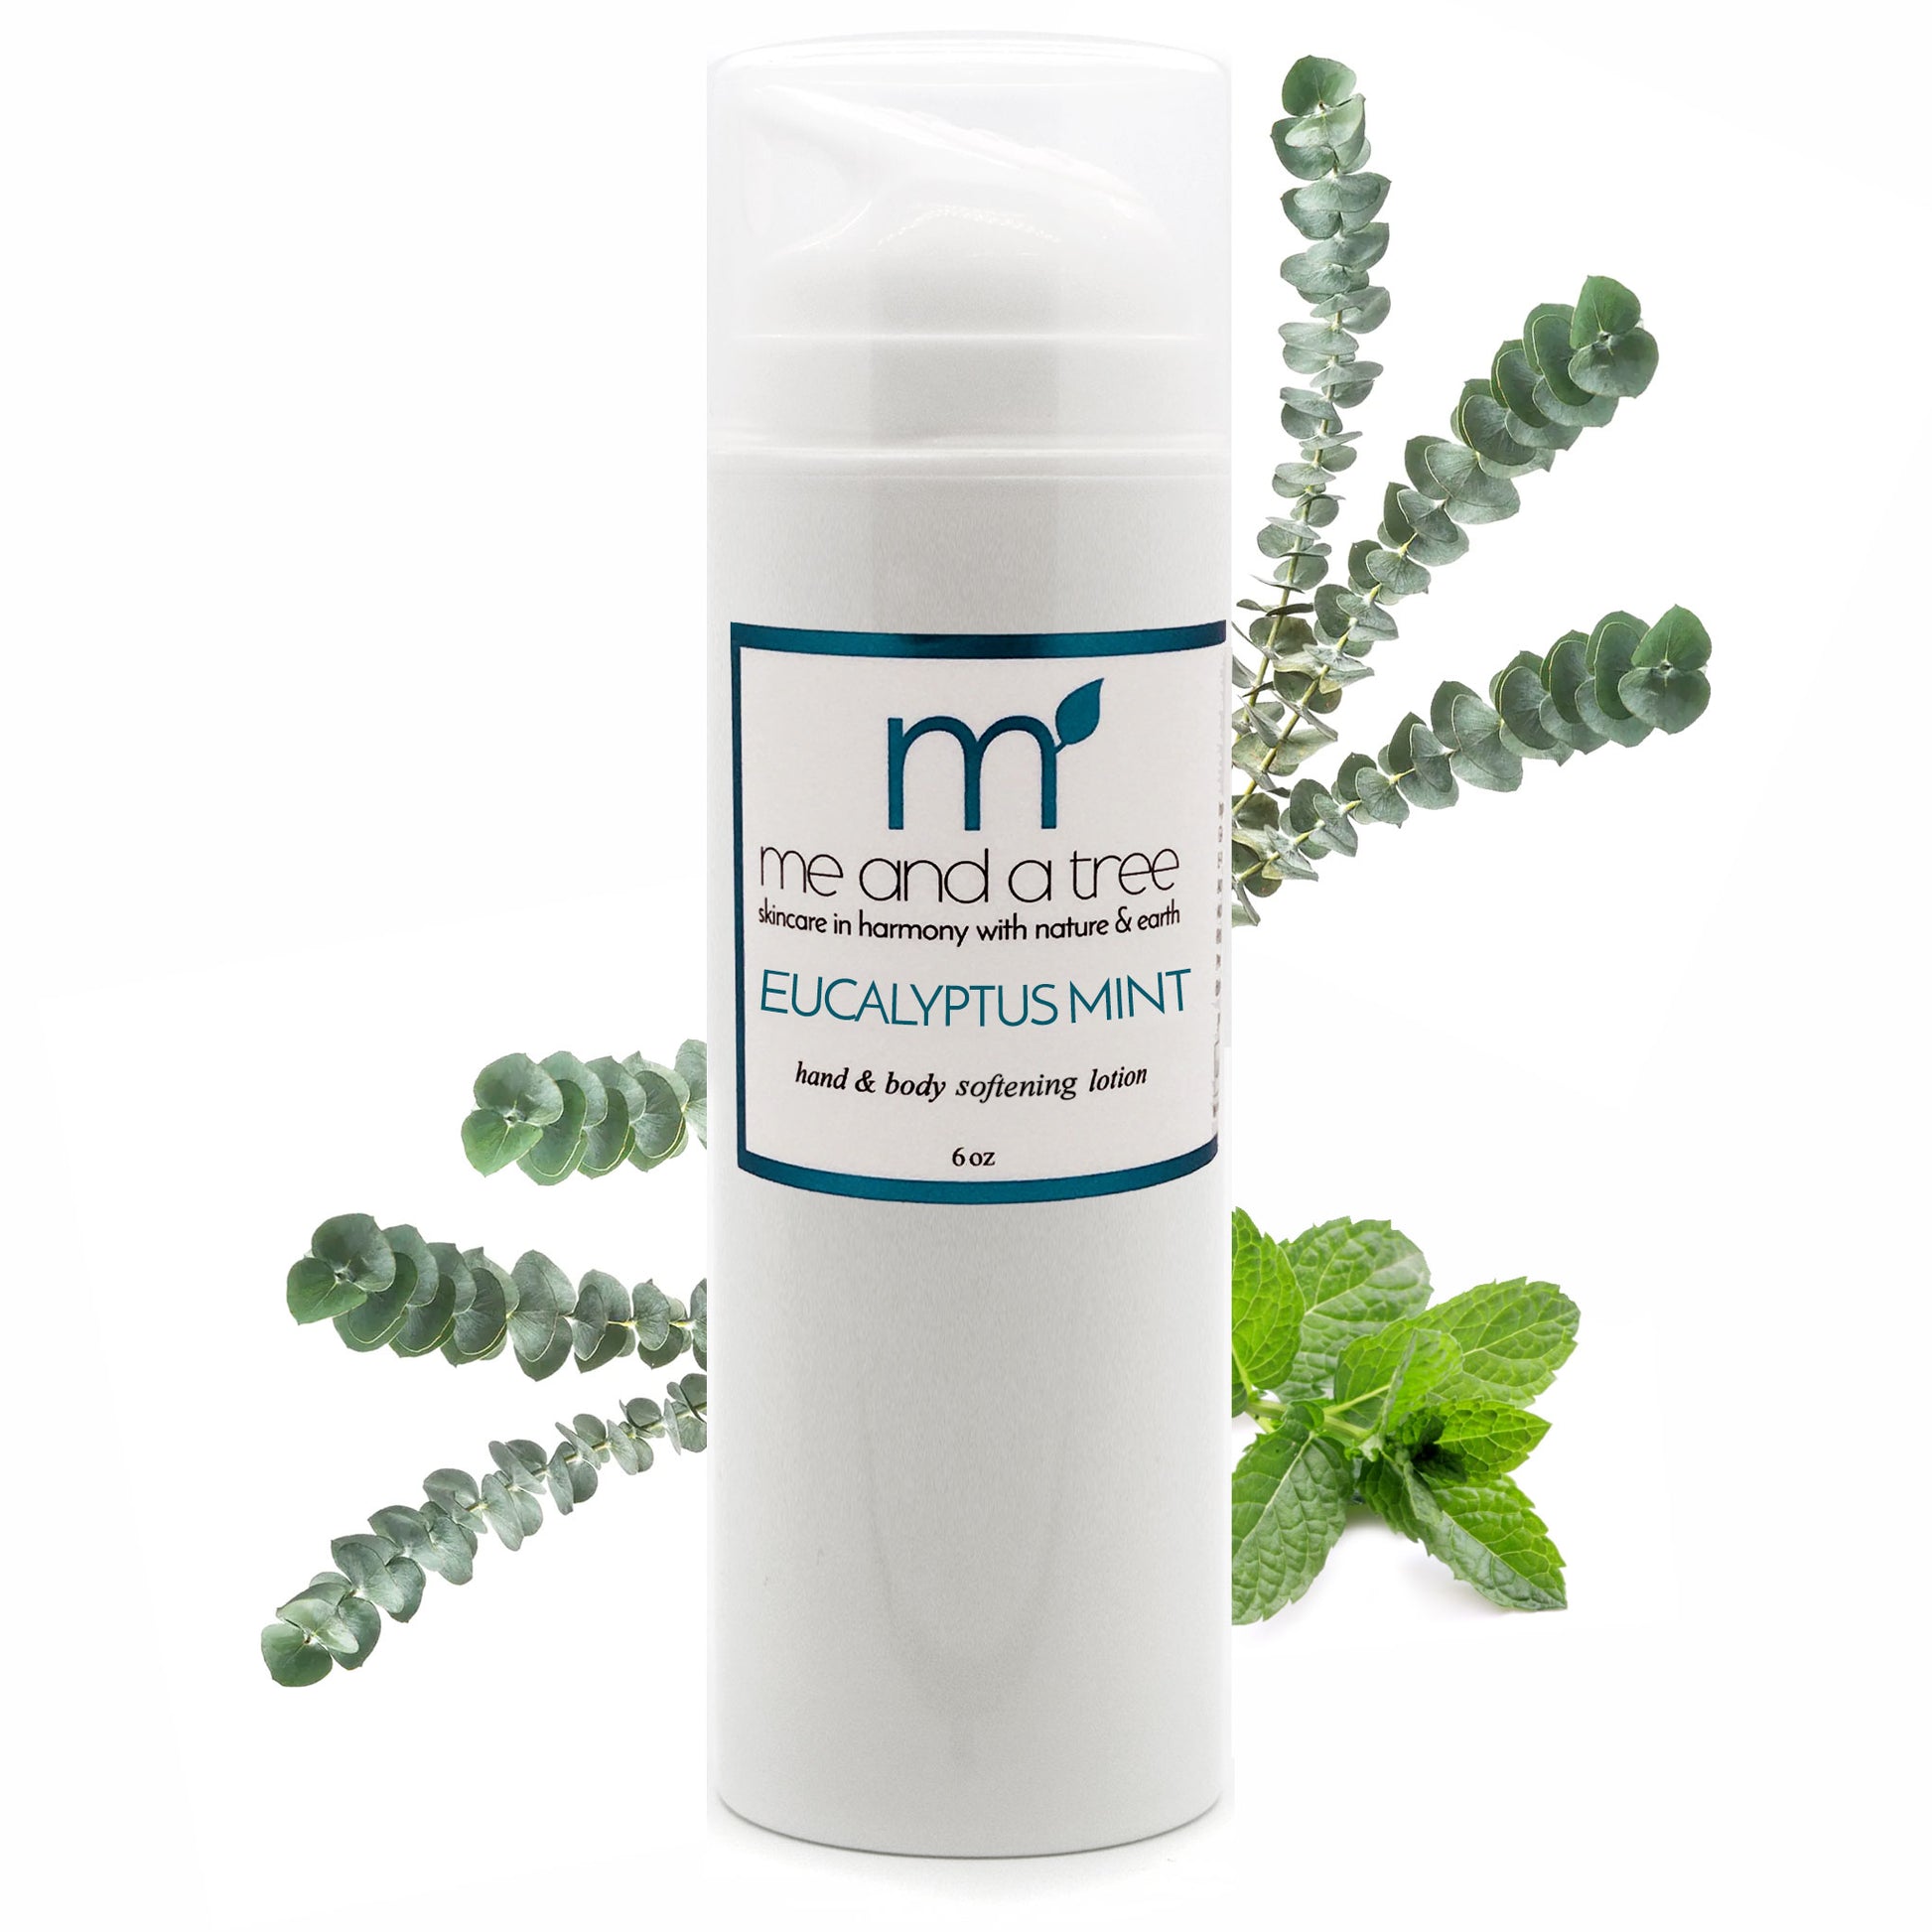 Handcrafted Eucalyptus Mint Natural Hand & Body Lotion Skin Care Sun Relief Cream made with Borage and Aloe, enriched with essential oils and plant-based nutrients, vegan and cruelty-free